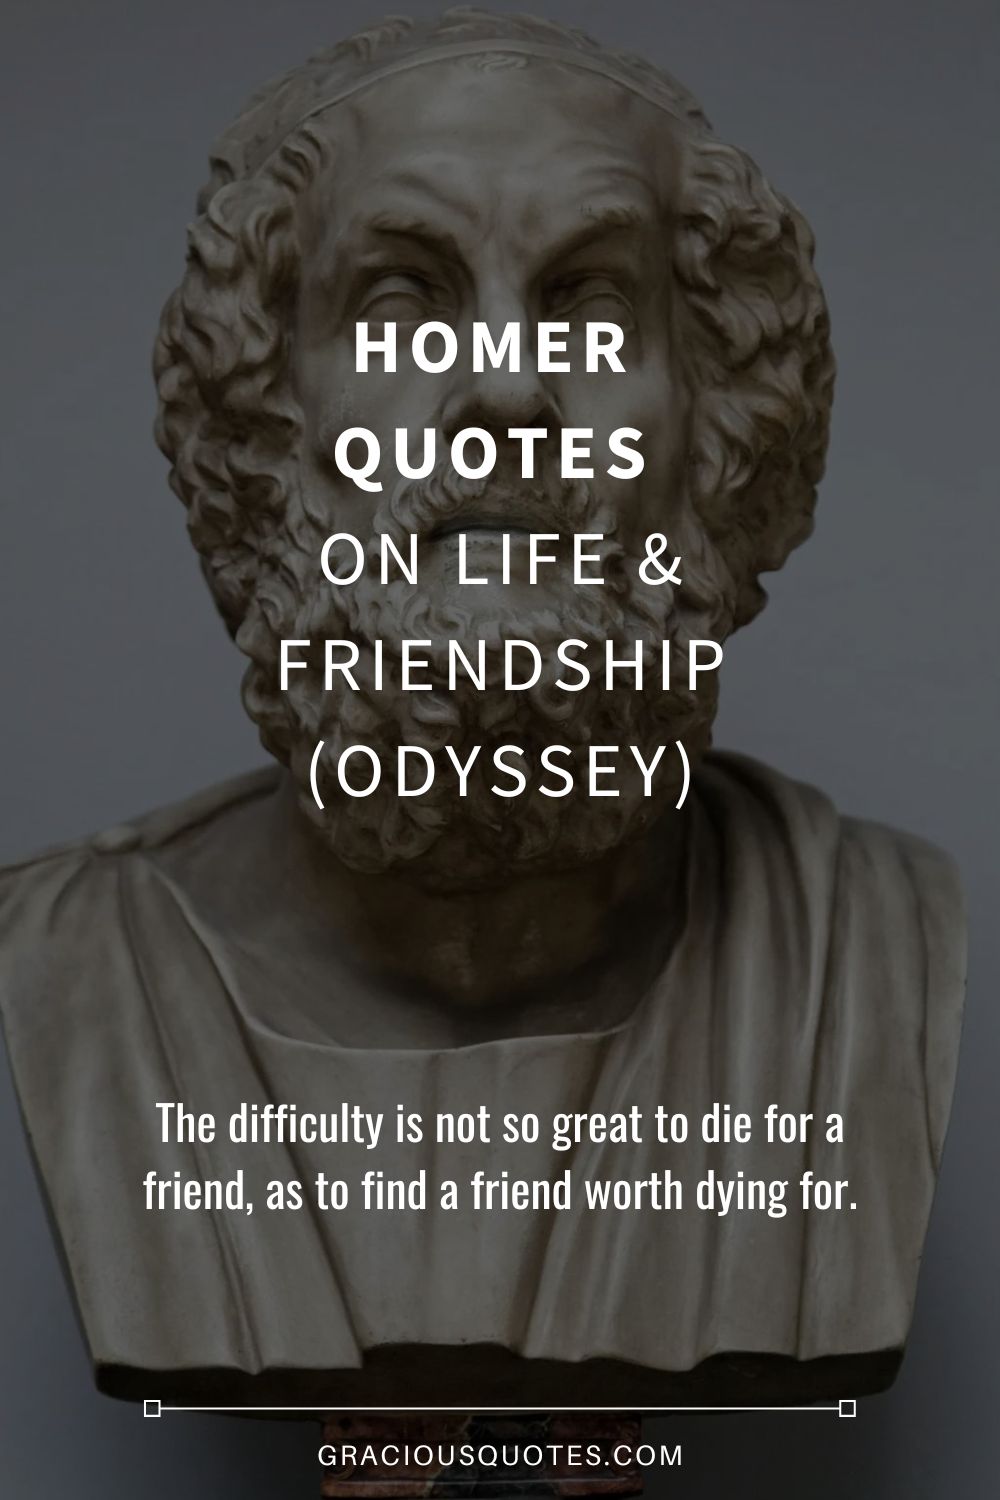 Homer Quotes on Life & Friendship (ODYSSEY) - Gracious Quotes